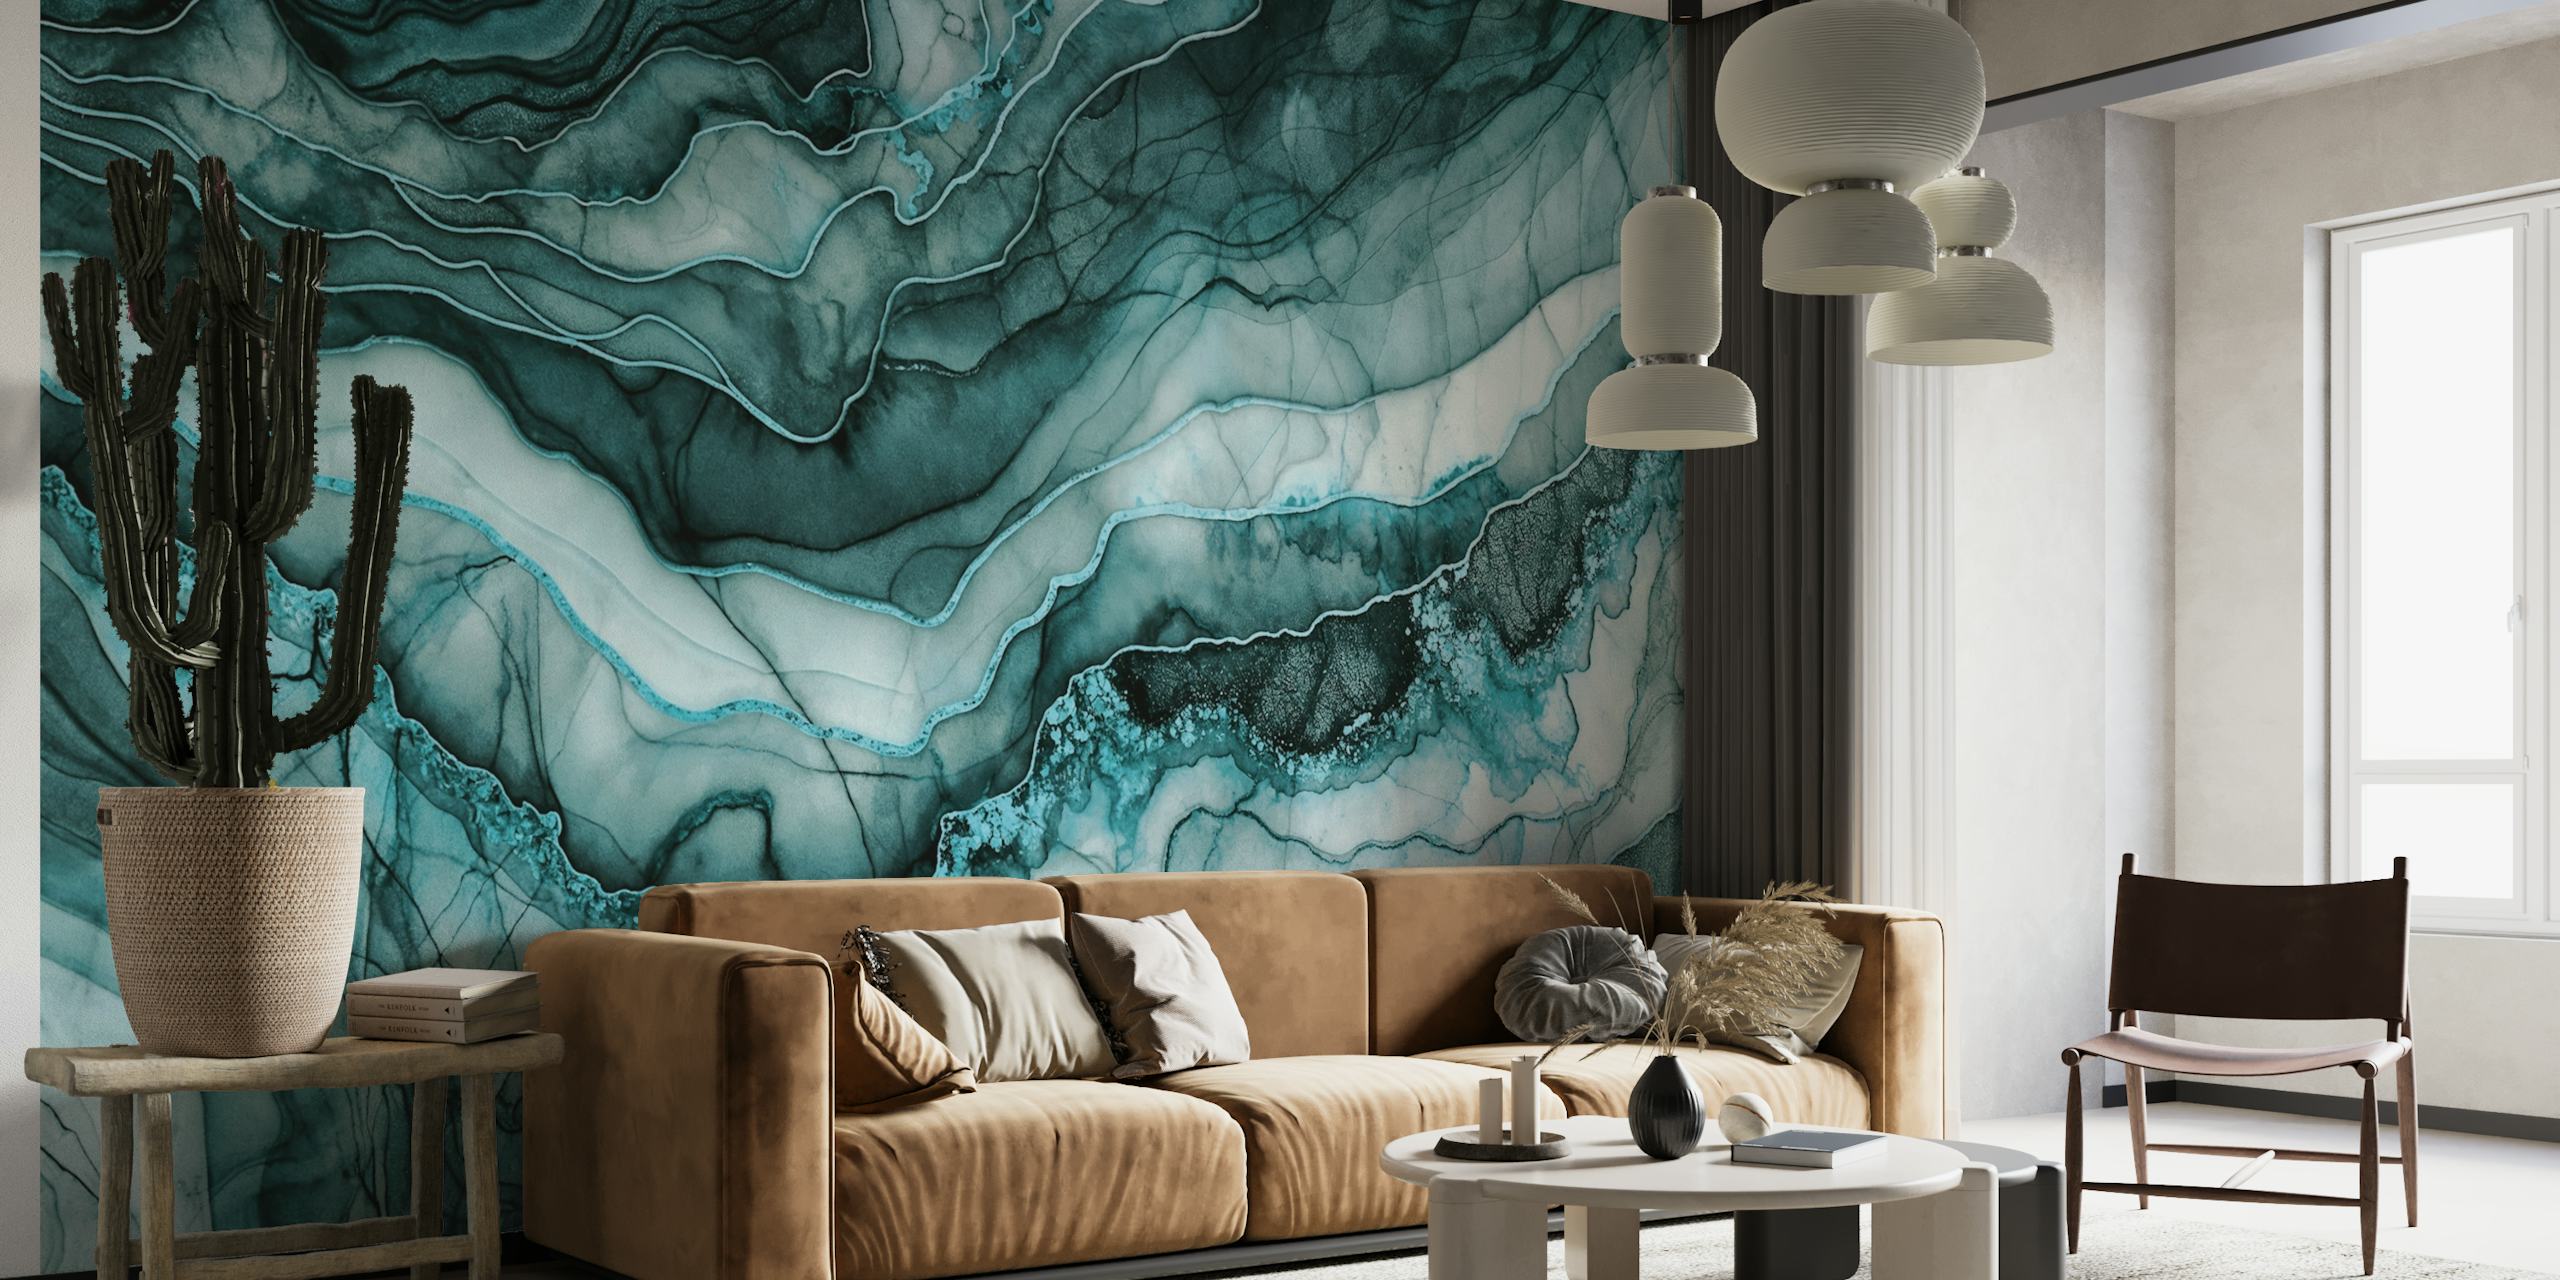 Magnific Marble De Luxe Teal tapete